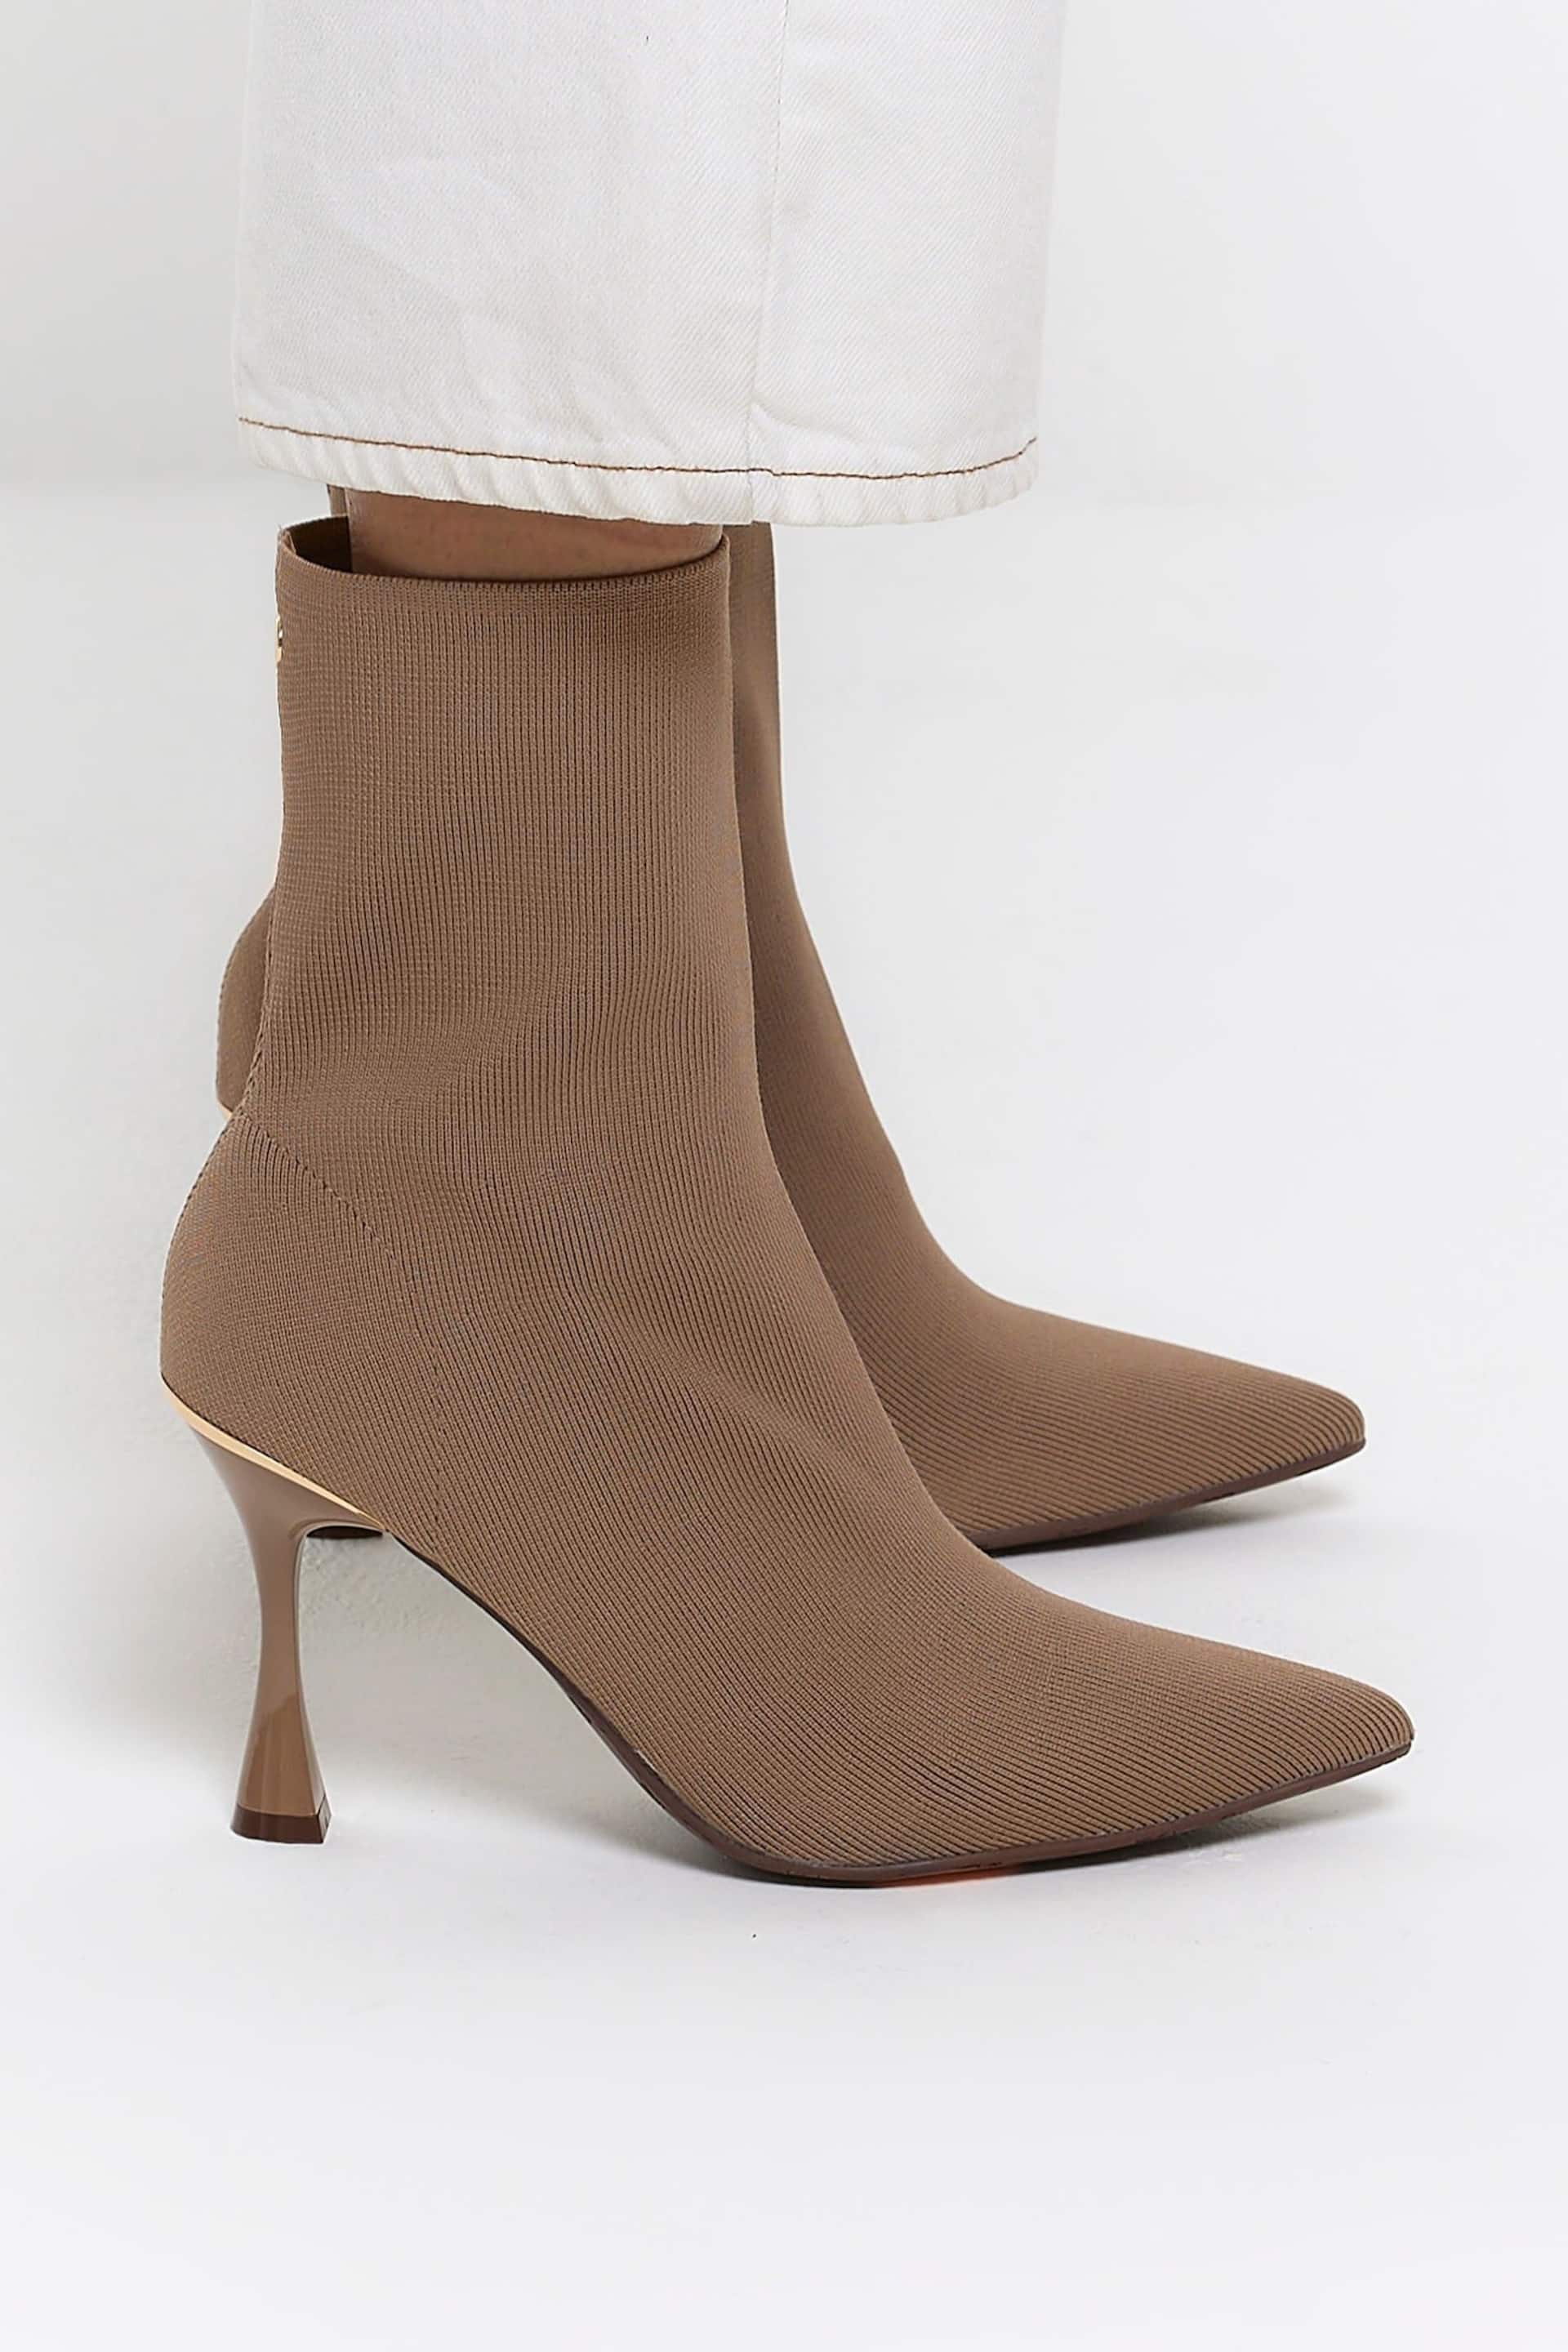 River Island Brown Knitted Point Ankle Boots - Image 1 of 6